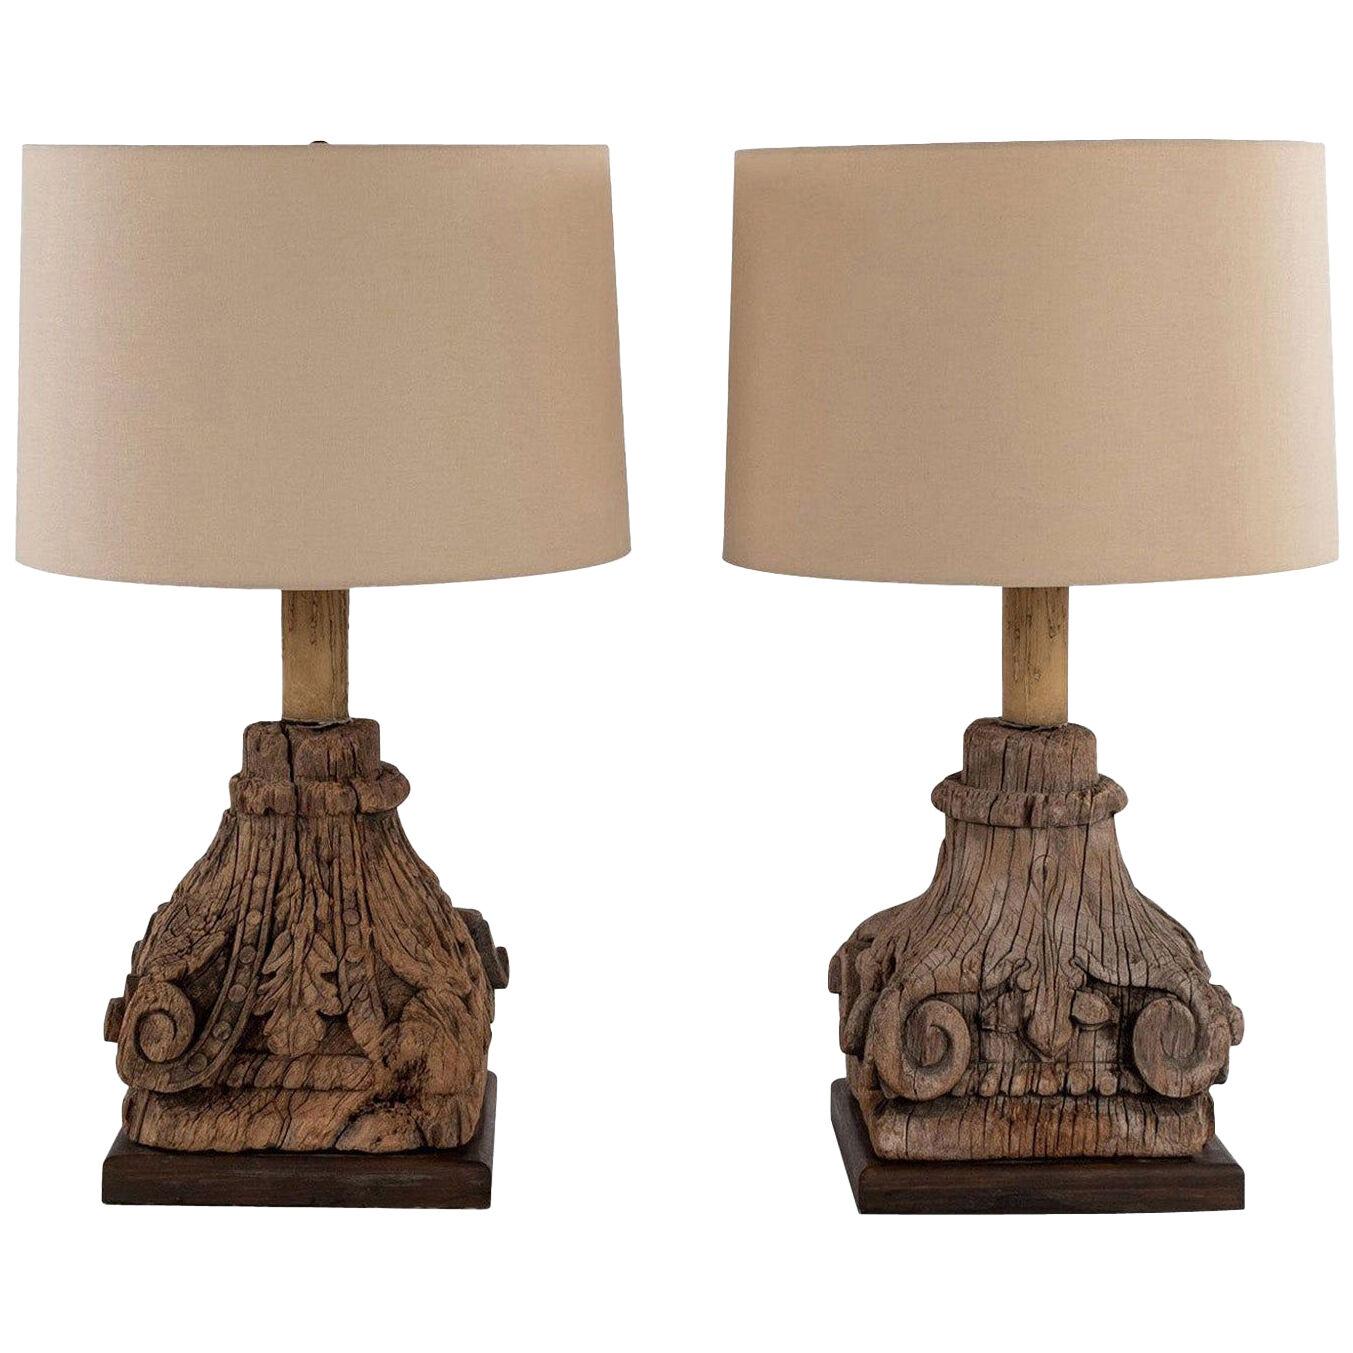 Pair of Carved Capital Table Lamps	